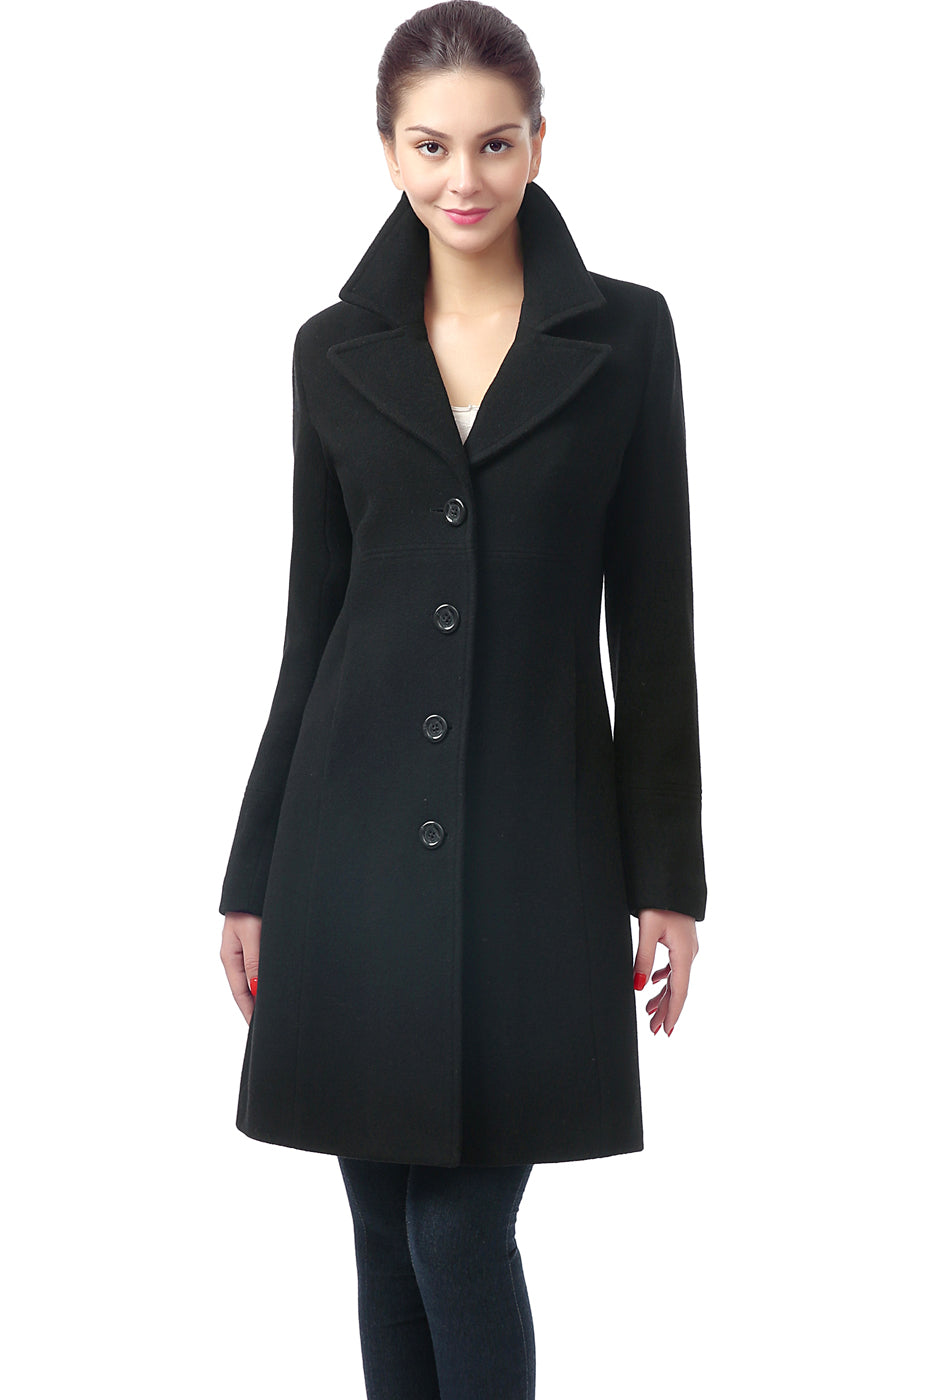 Felicia Double Face Wool Blend Fitted Coat, Xs / Black